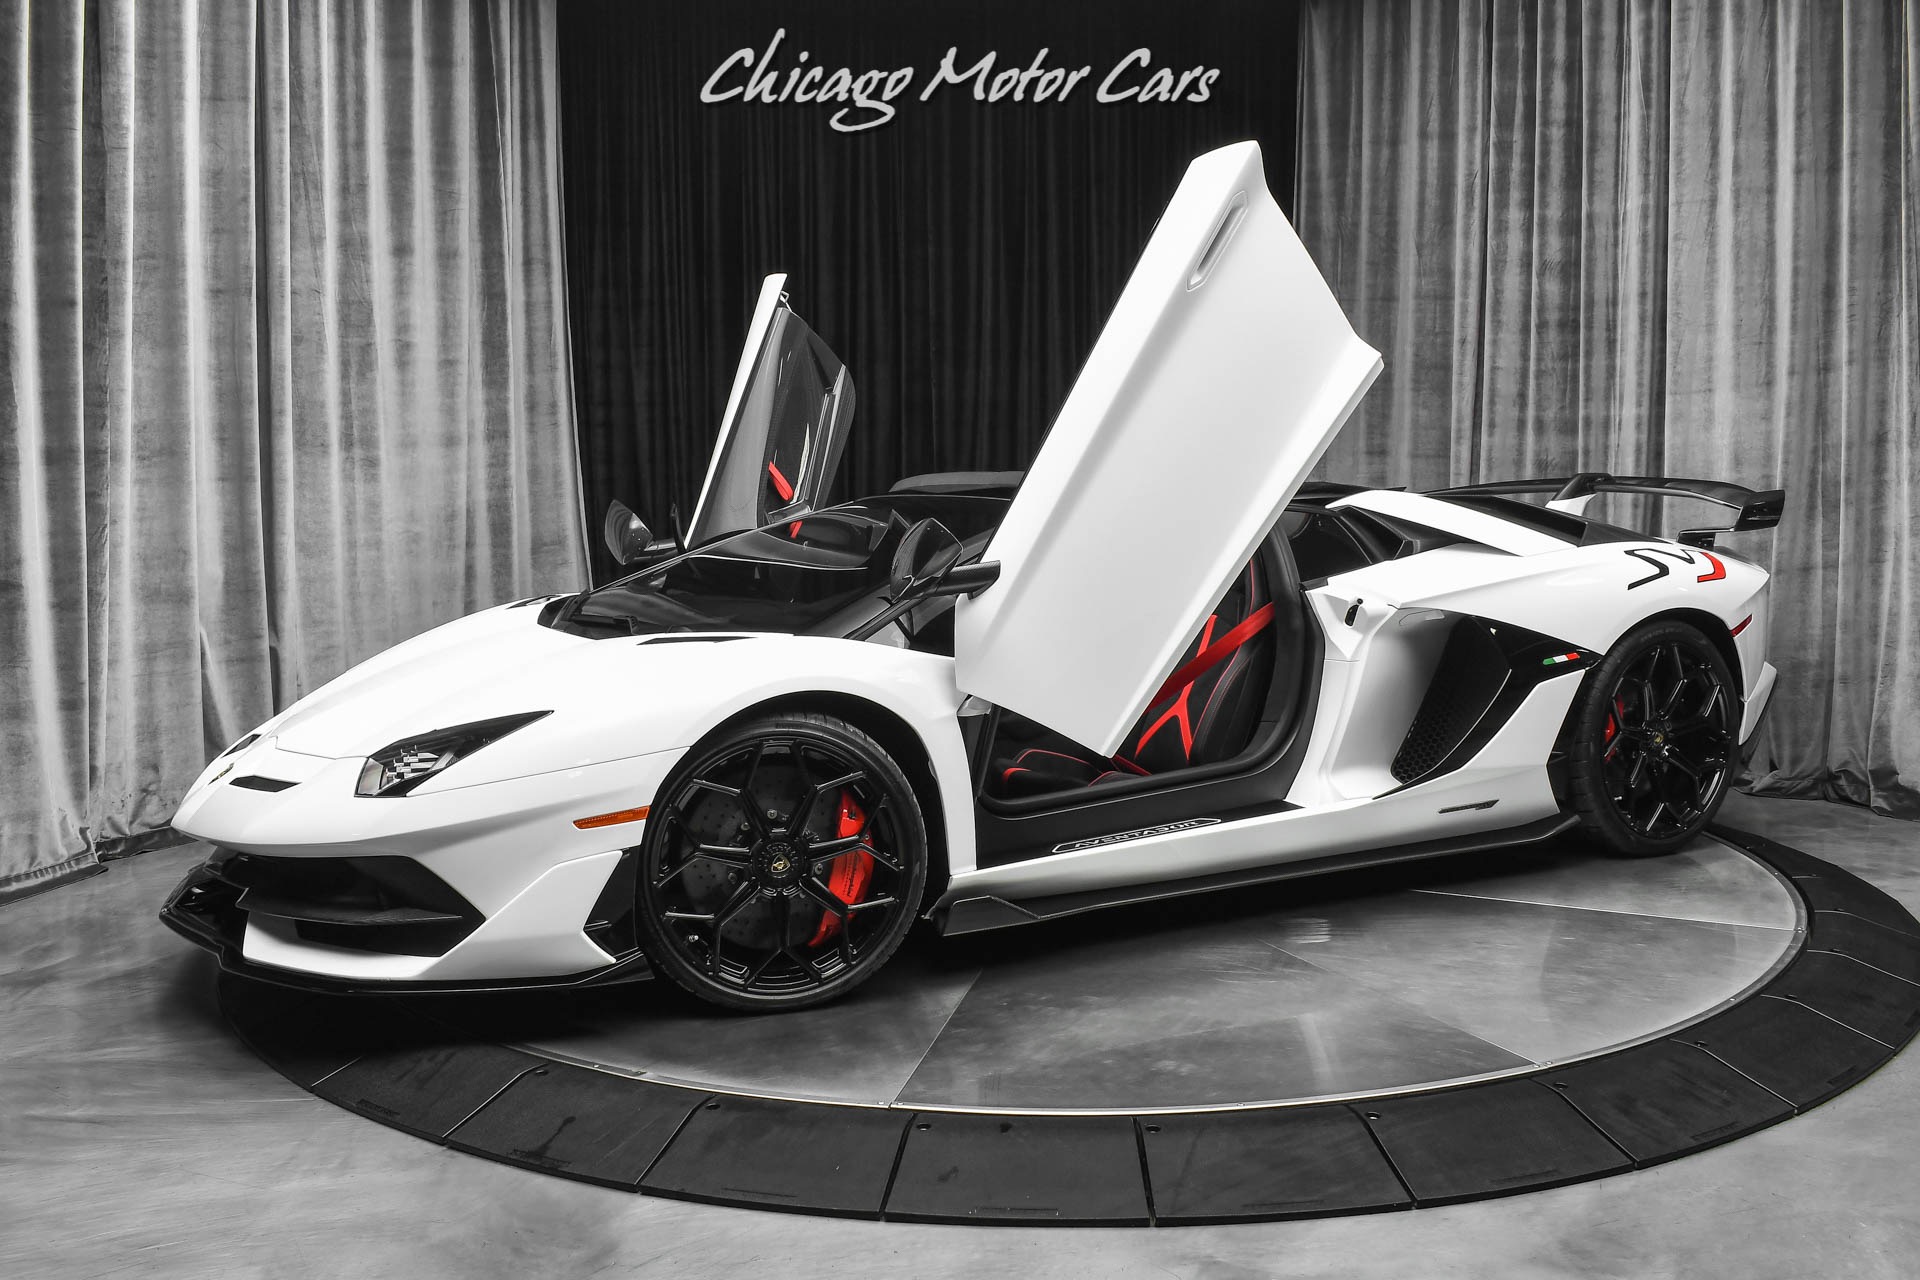 Used 2020 Lamborghini Aventador SVJ LP770-4 Roadster Only 332 Miles For  Sale (Special Pricing) | Chicago Motor Cars Stock #17977